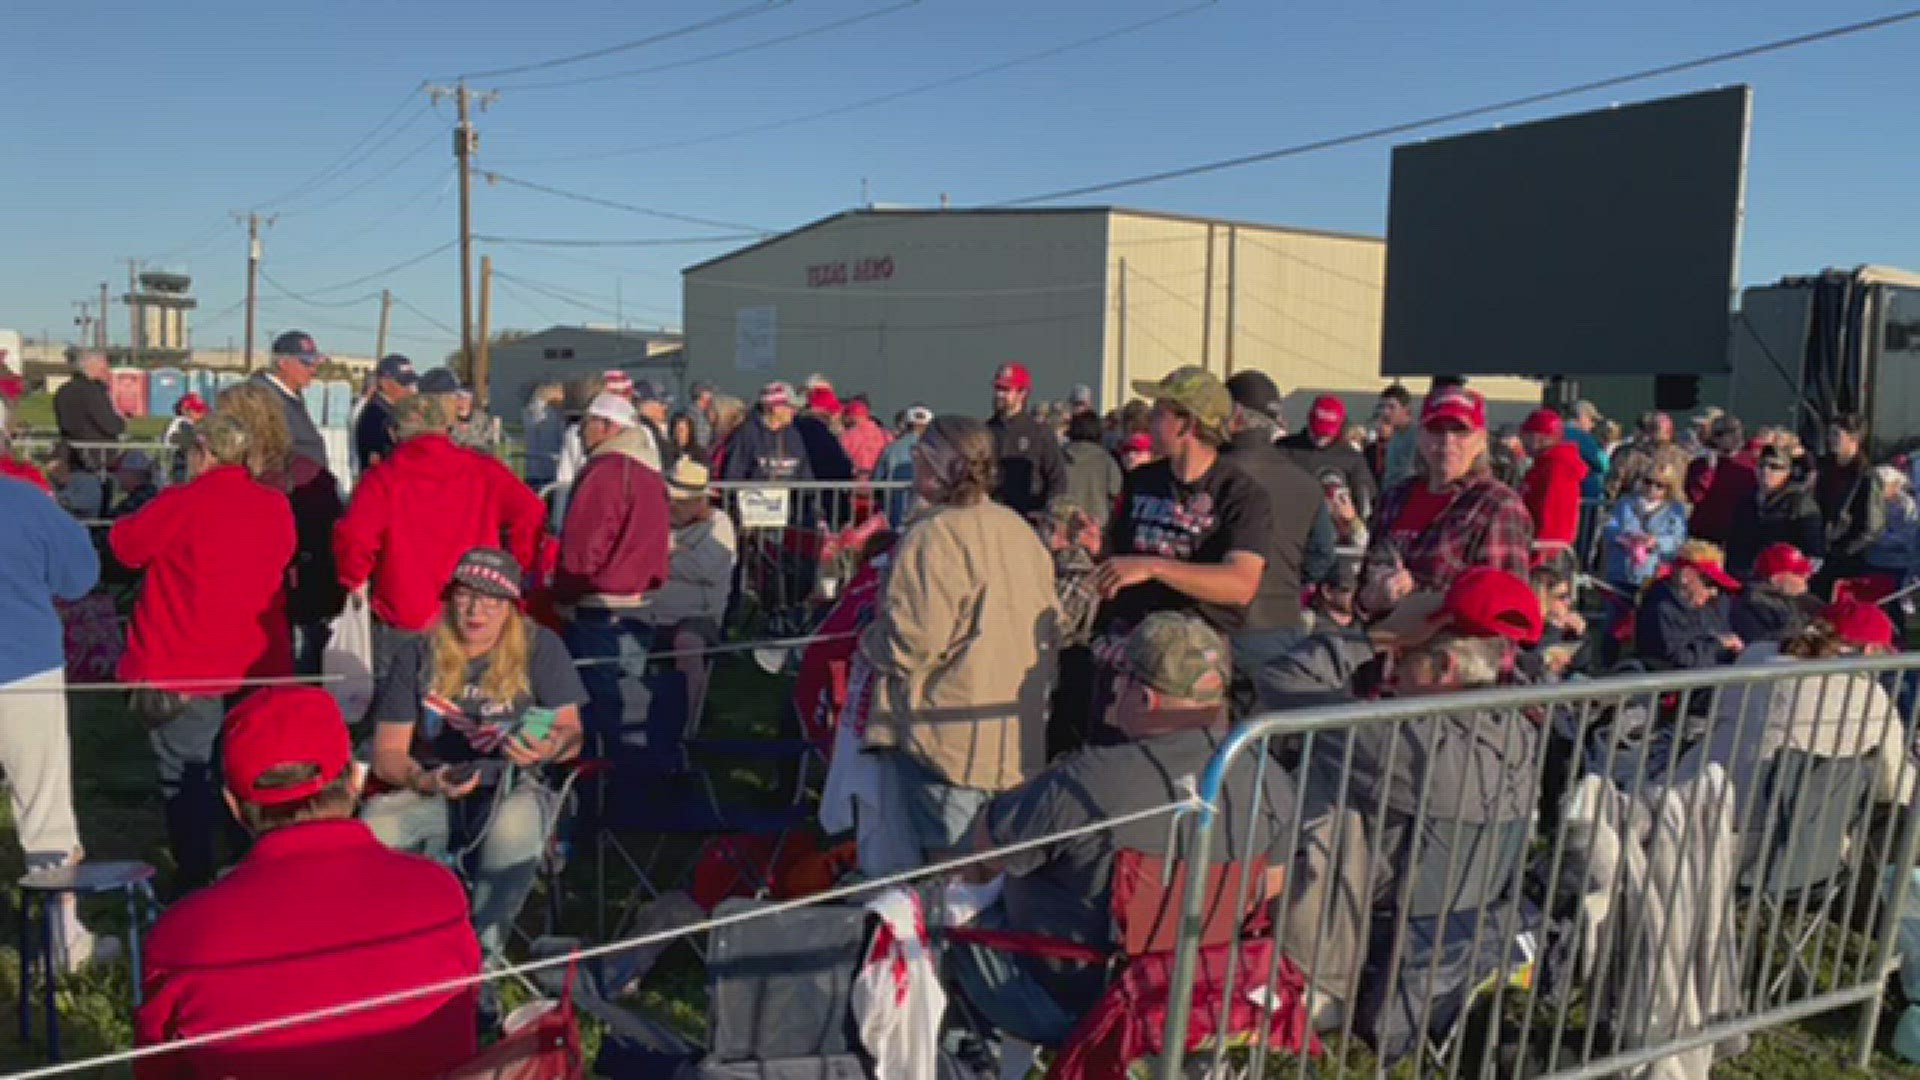 Thousands showed up hours ahead of time to see former President Donald Trump speak at the Waco Regional Airport.